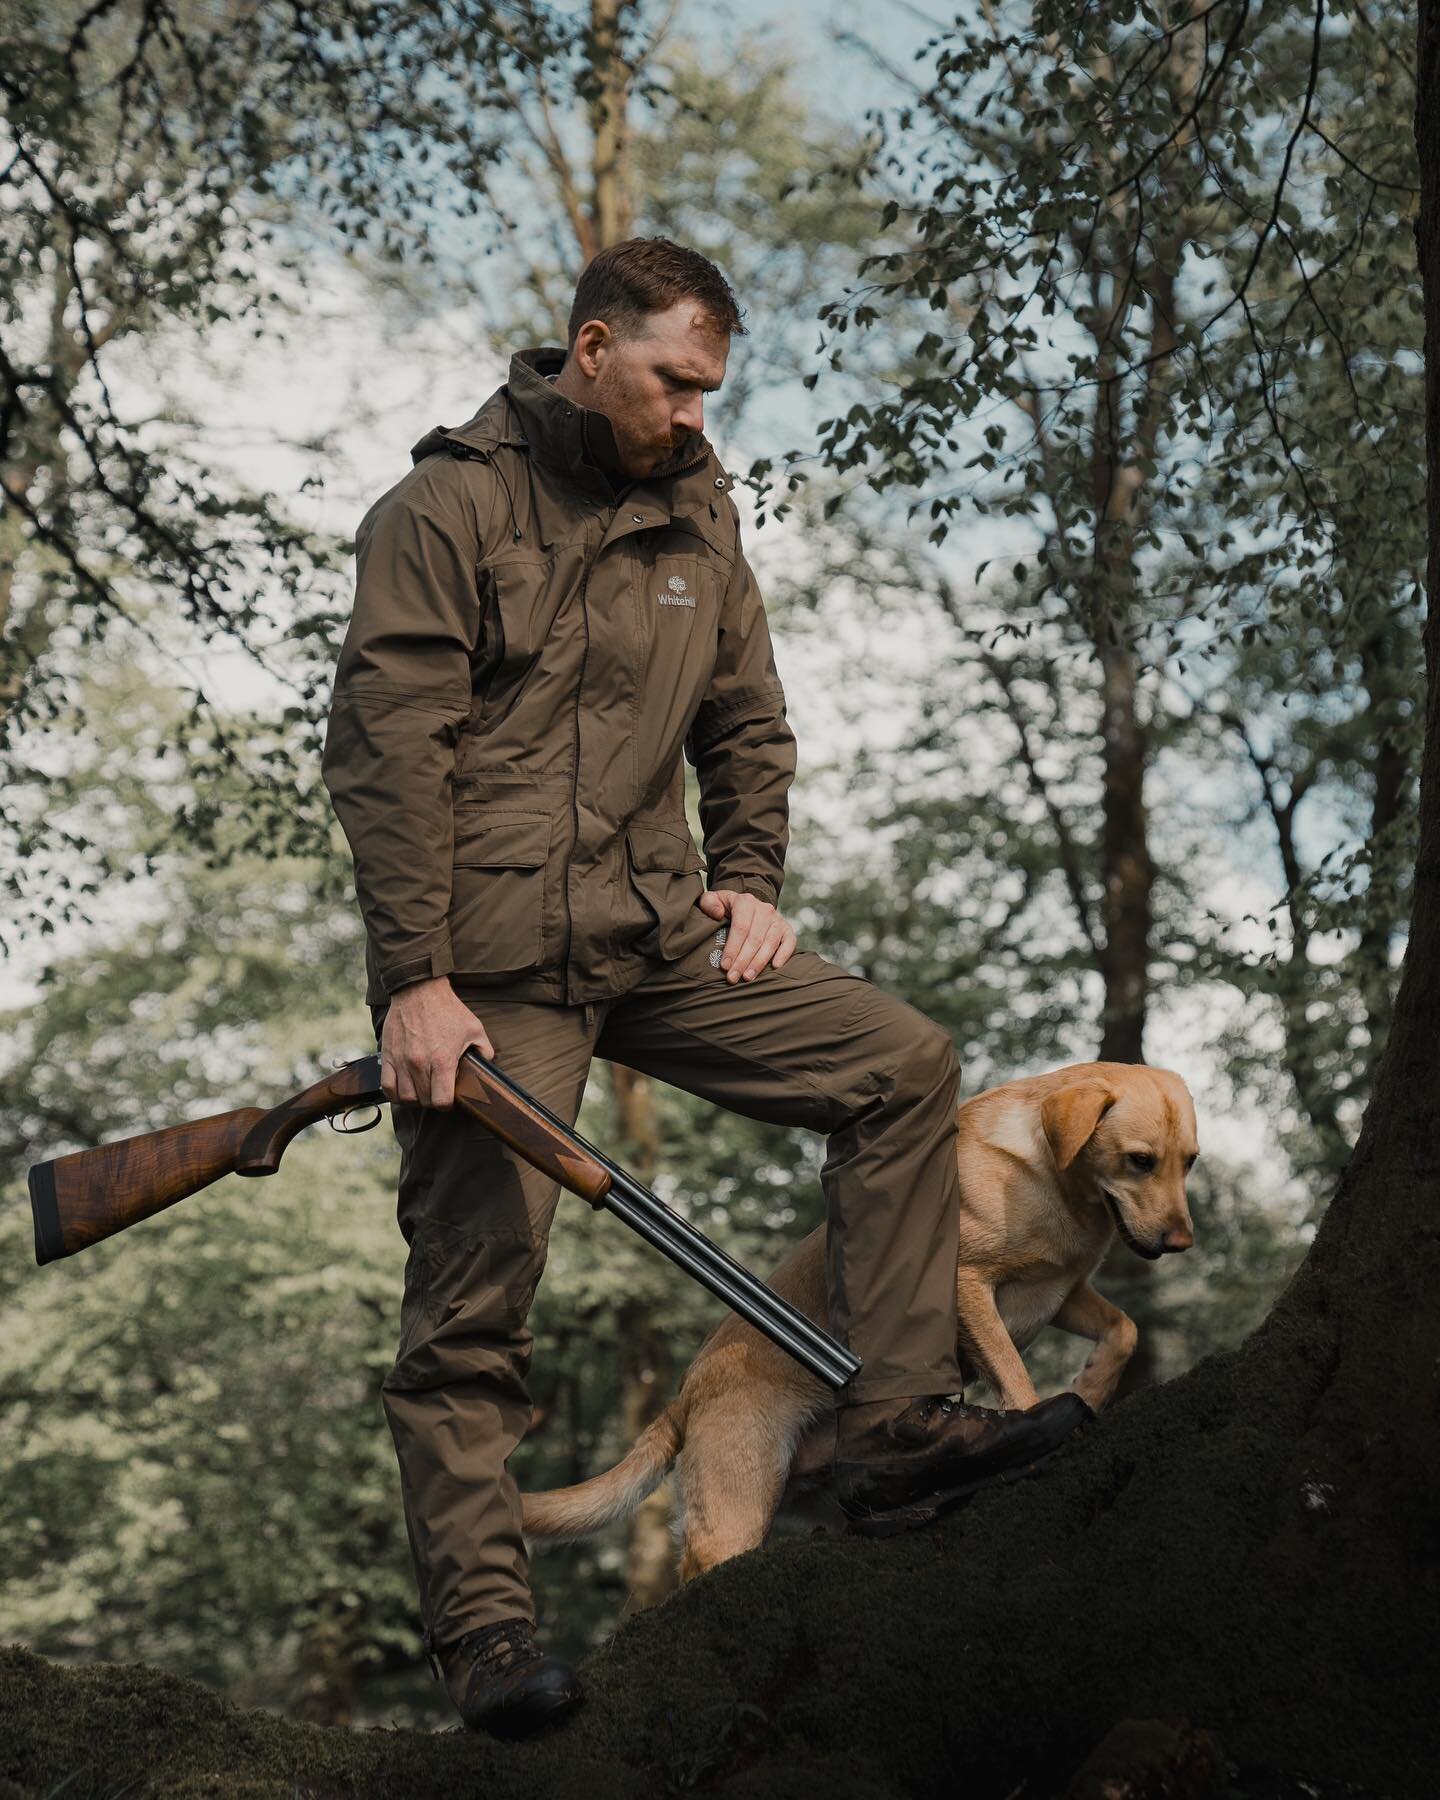 Sharing some more from a recent shoot with outdoor clothing brand @whitehillpaddock looking forward to shooting some video with them soon too! 
.
.
.
.
.
#photography #outdoorfashion #countryclothing #fieldsports #dogsofinstagram #fashionshoot #count